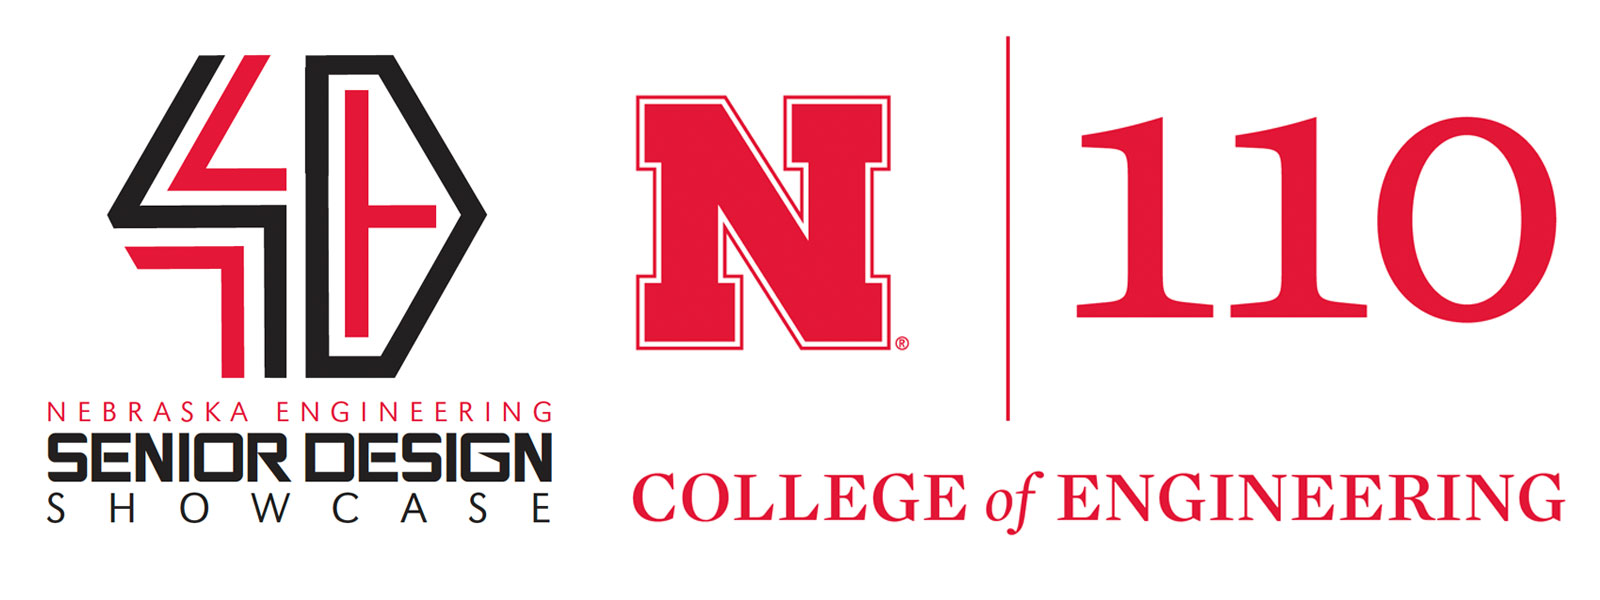 The 2019 Senior Design Showcase is April 26 at Memorial Stadium, followed by a College of Engineering 110th anniversary reception at the Van Brunt Visitors Center.